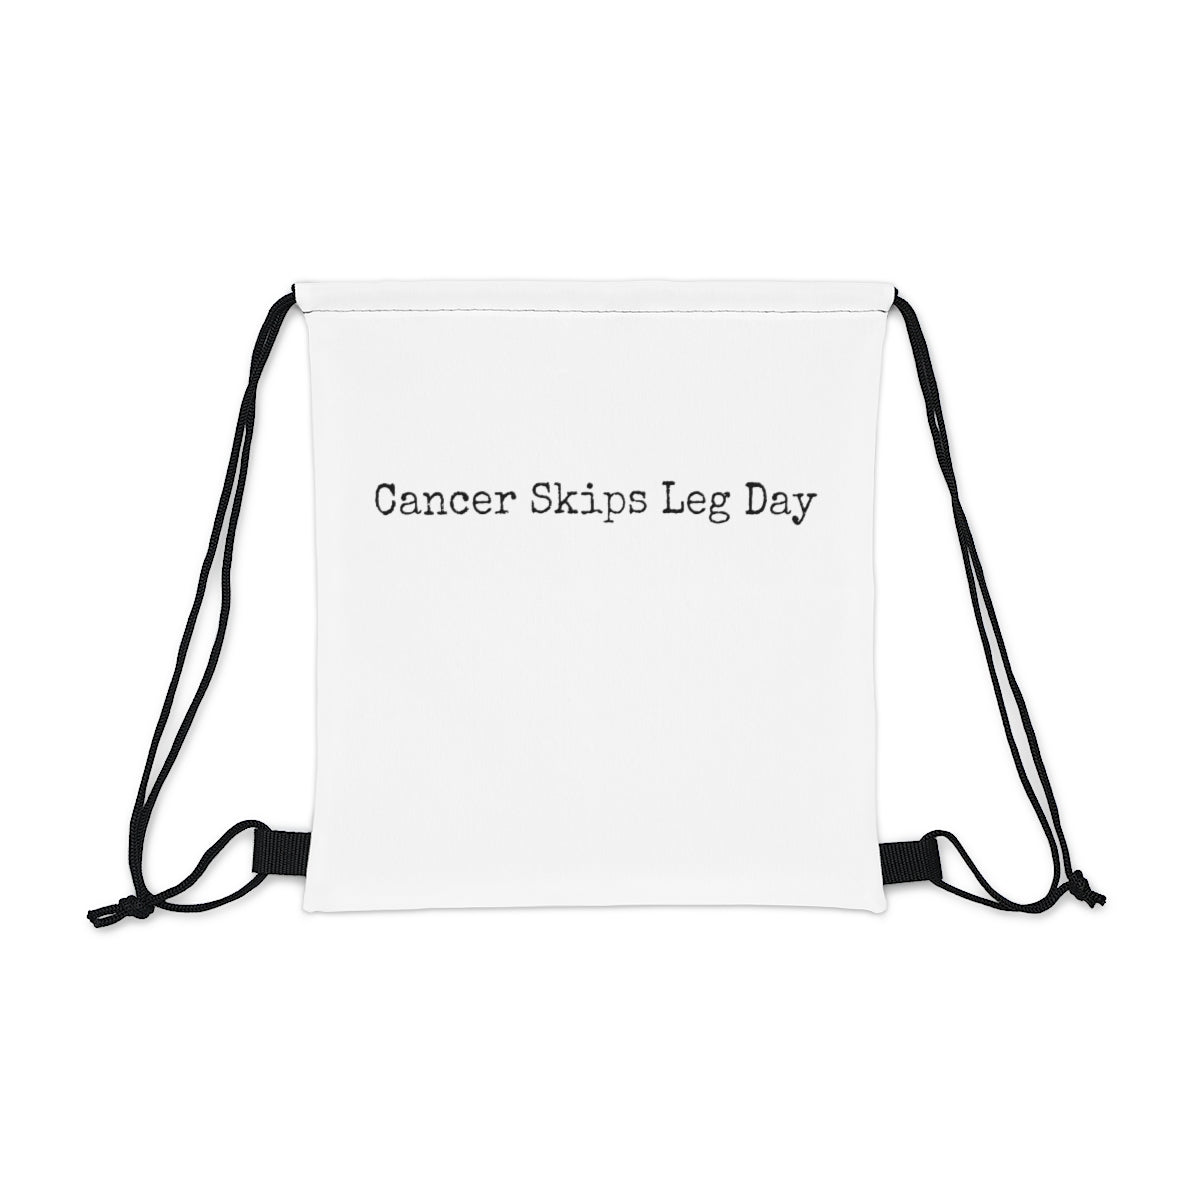 Outdoor Drawstring Bag Anti Cancer Cancer is Dumb Gym Bag Fitness Exercise Skips Leg Day Humorous